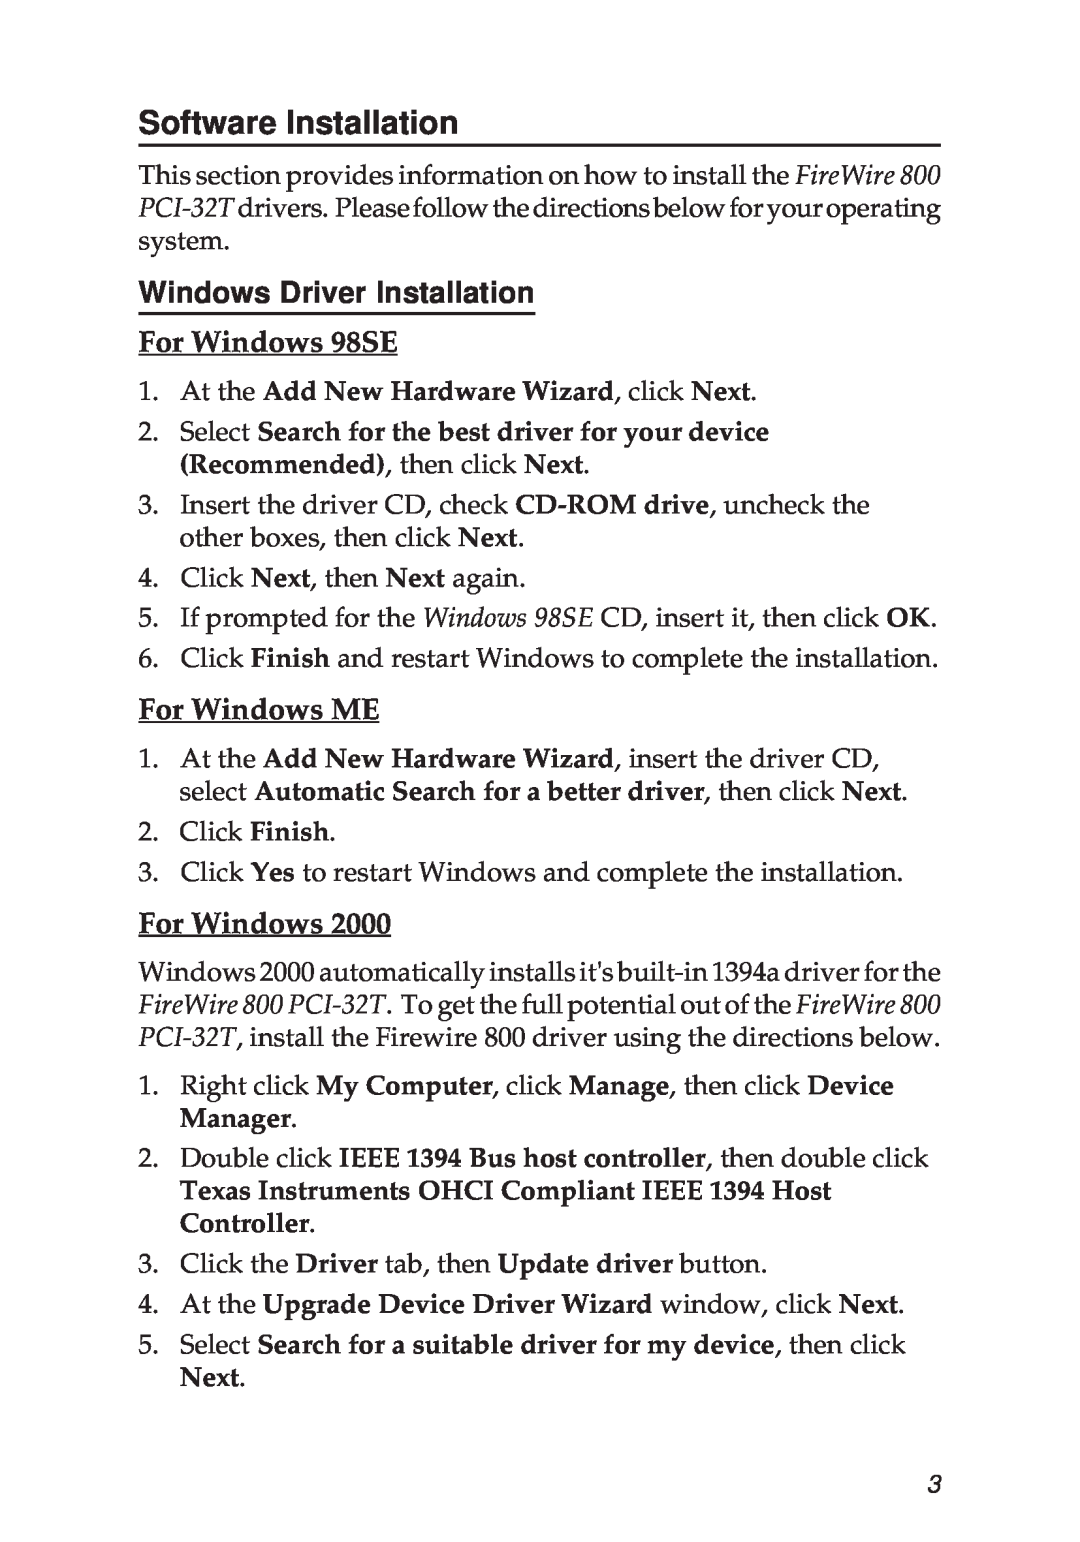 SIIG PCI-32T manual Software Installation, Windows Driver Installation, For Windows 98SE, For Windows ME 